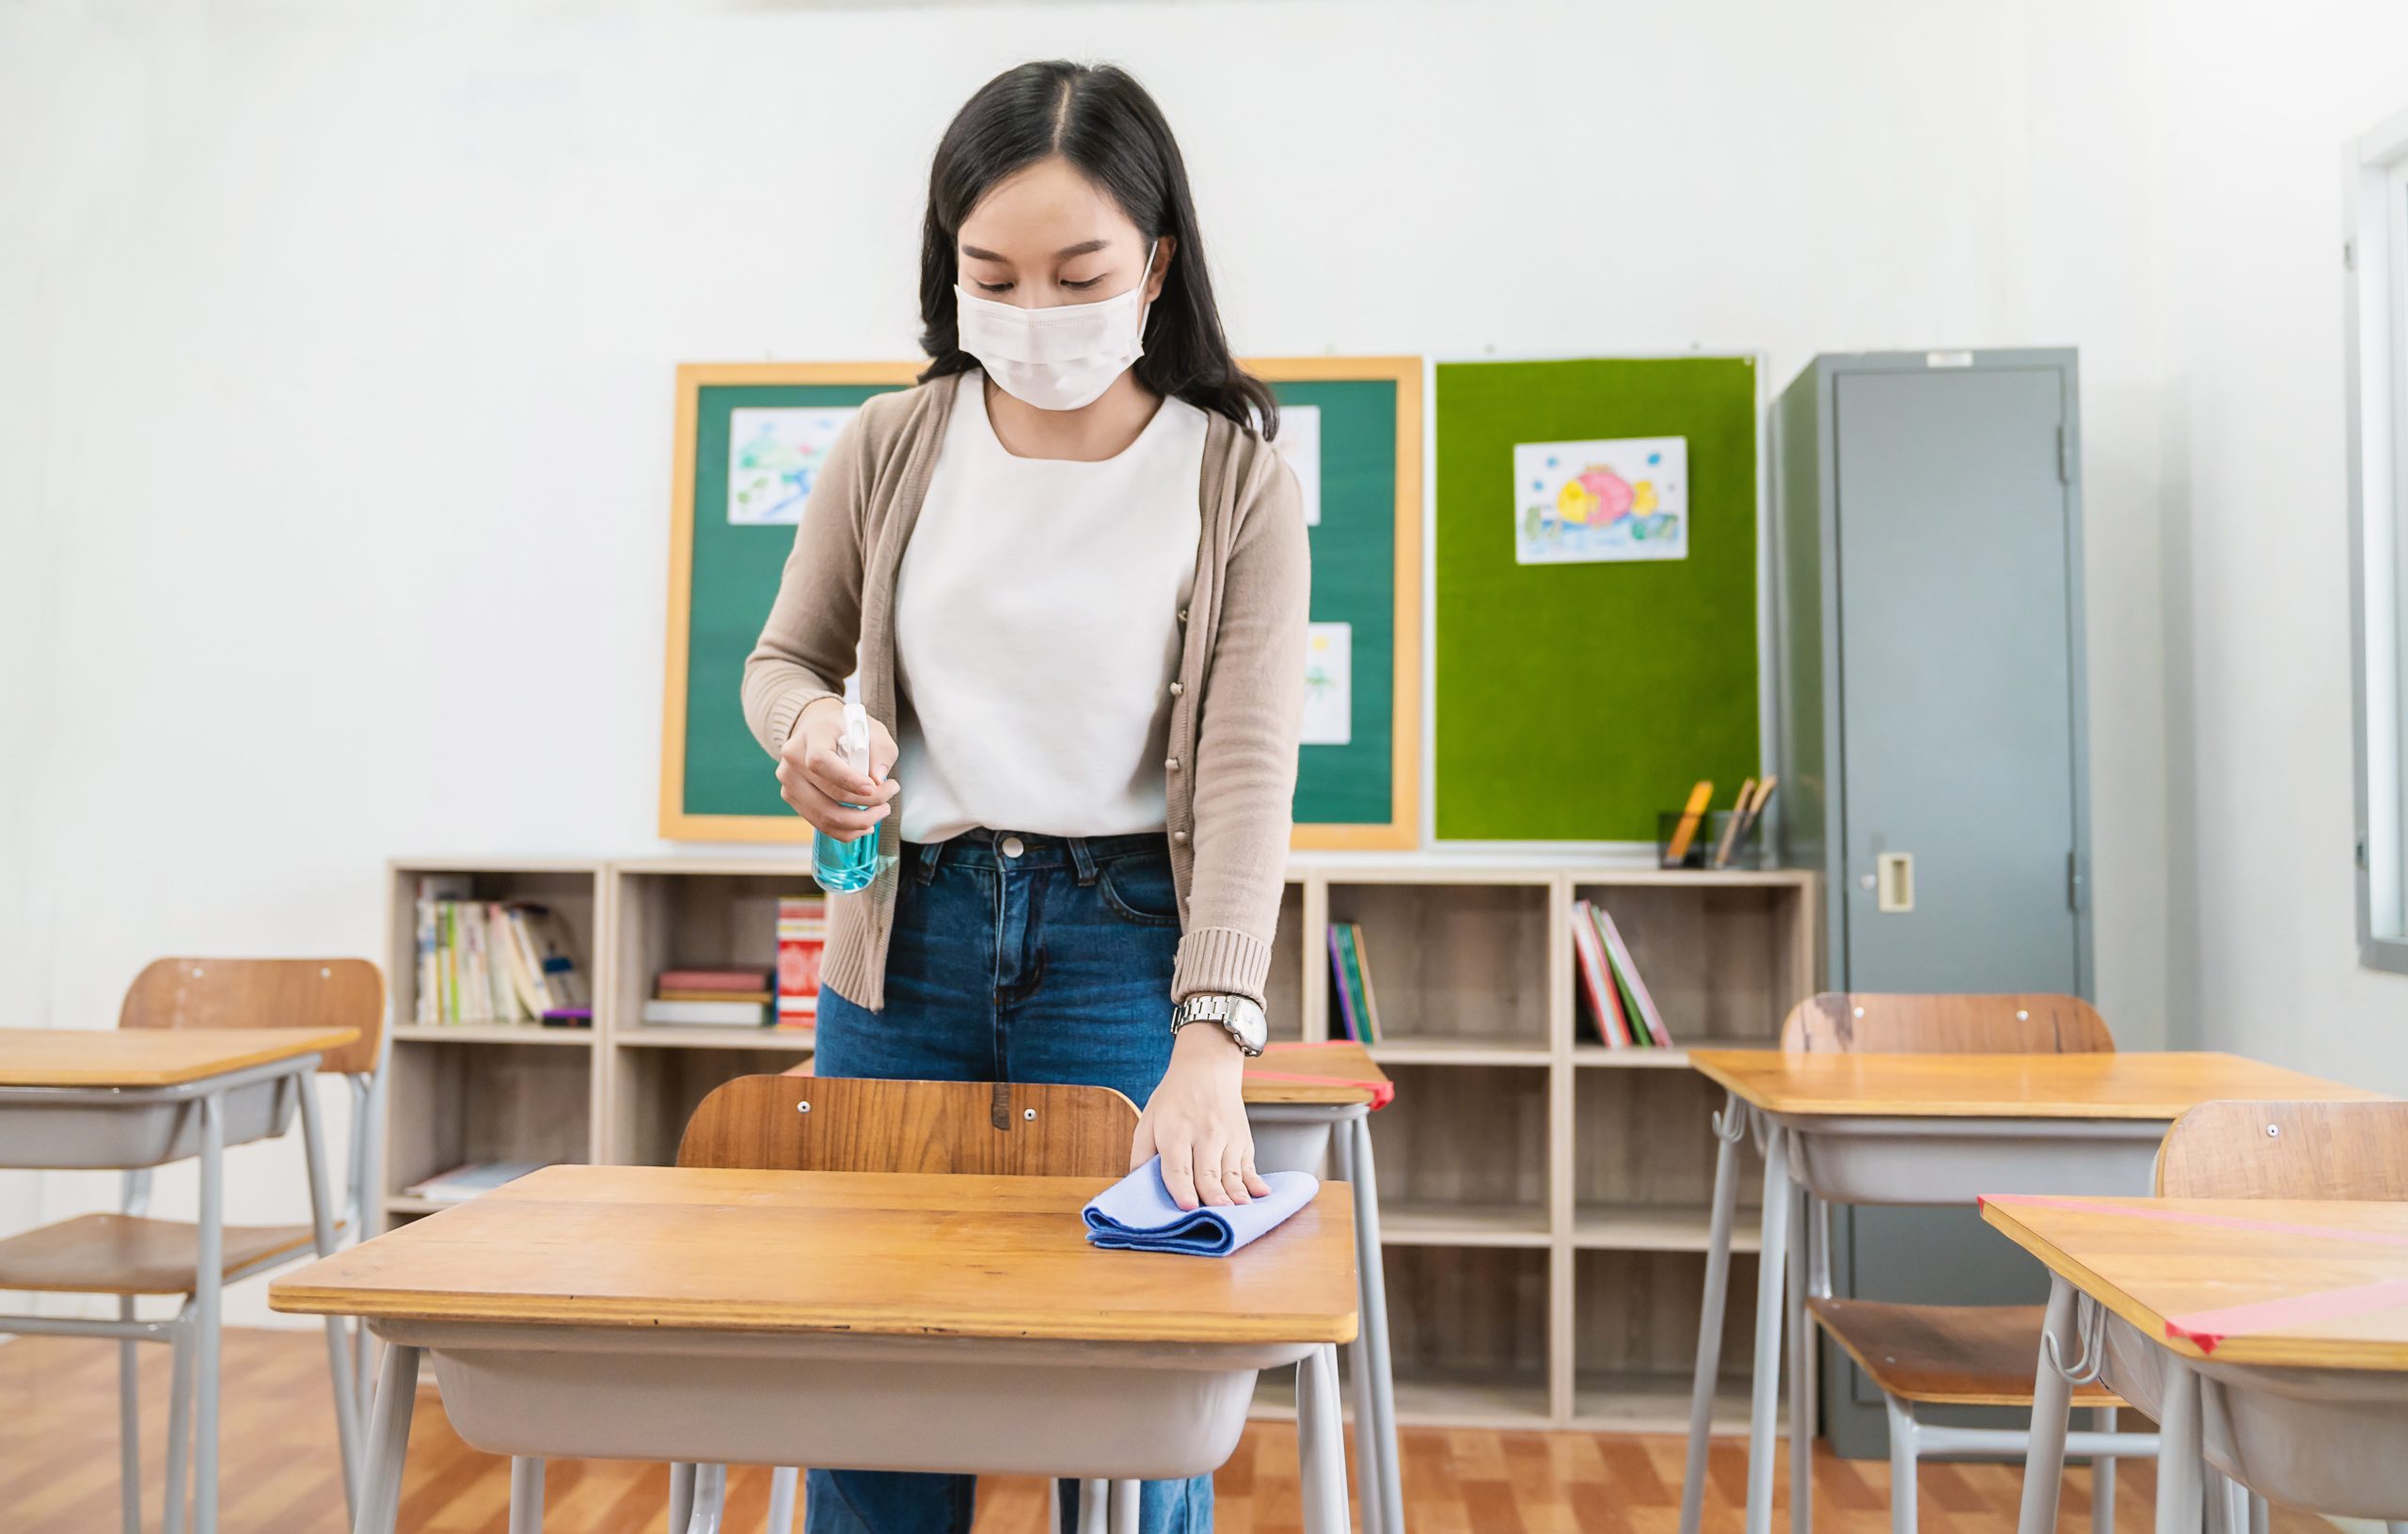 How can schools involve students in the cleaning process?